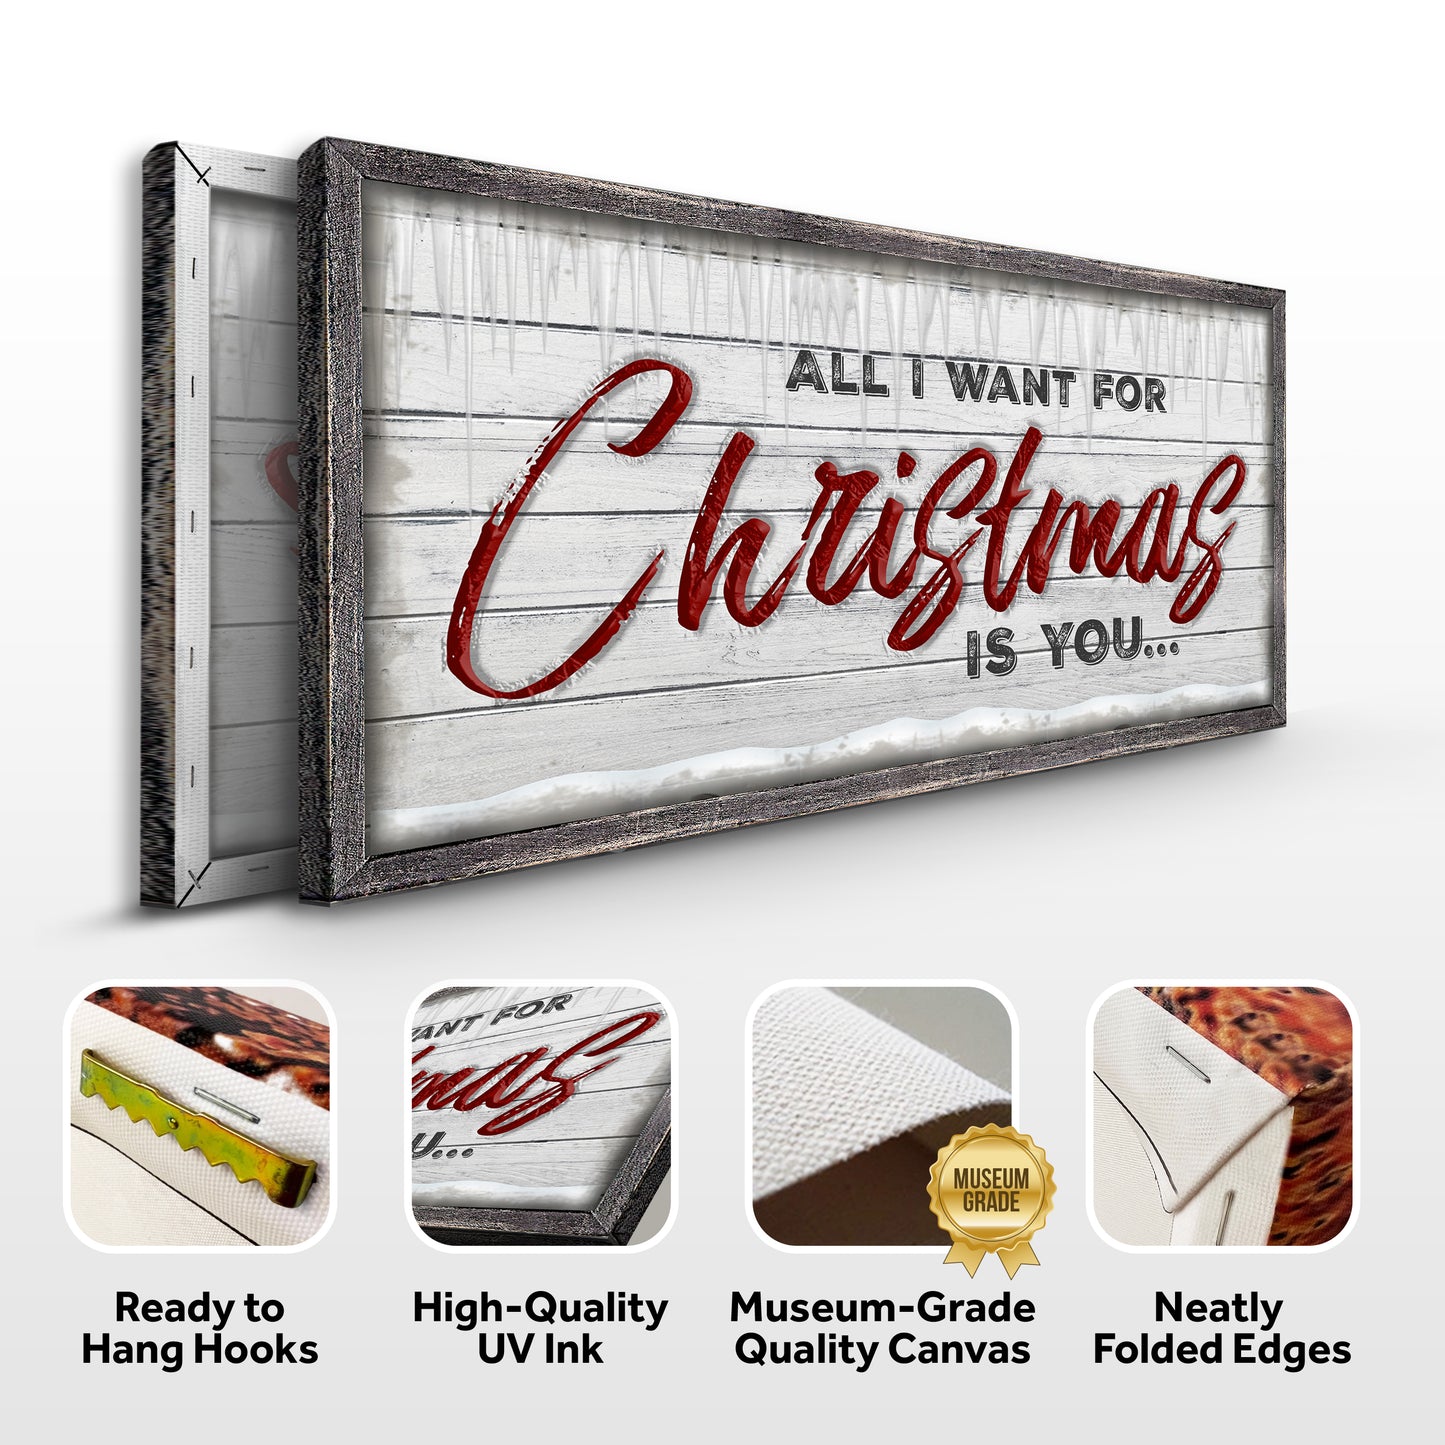 All I Want For Christmas Is You Sign (Free Shipping)